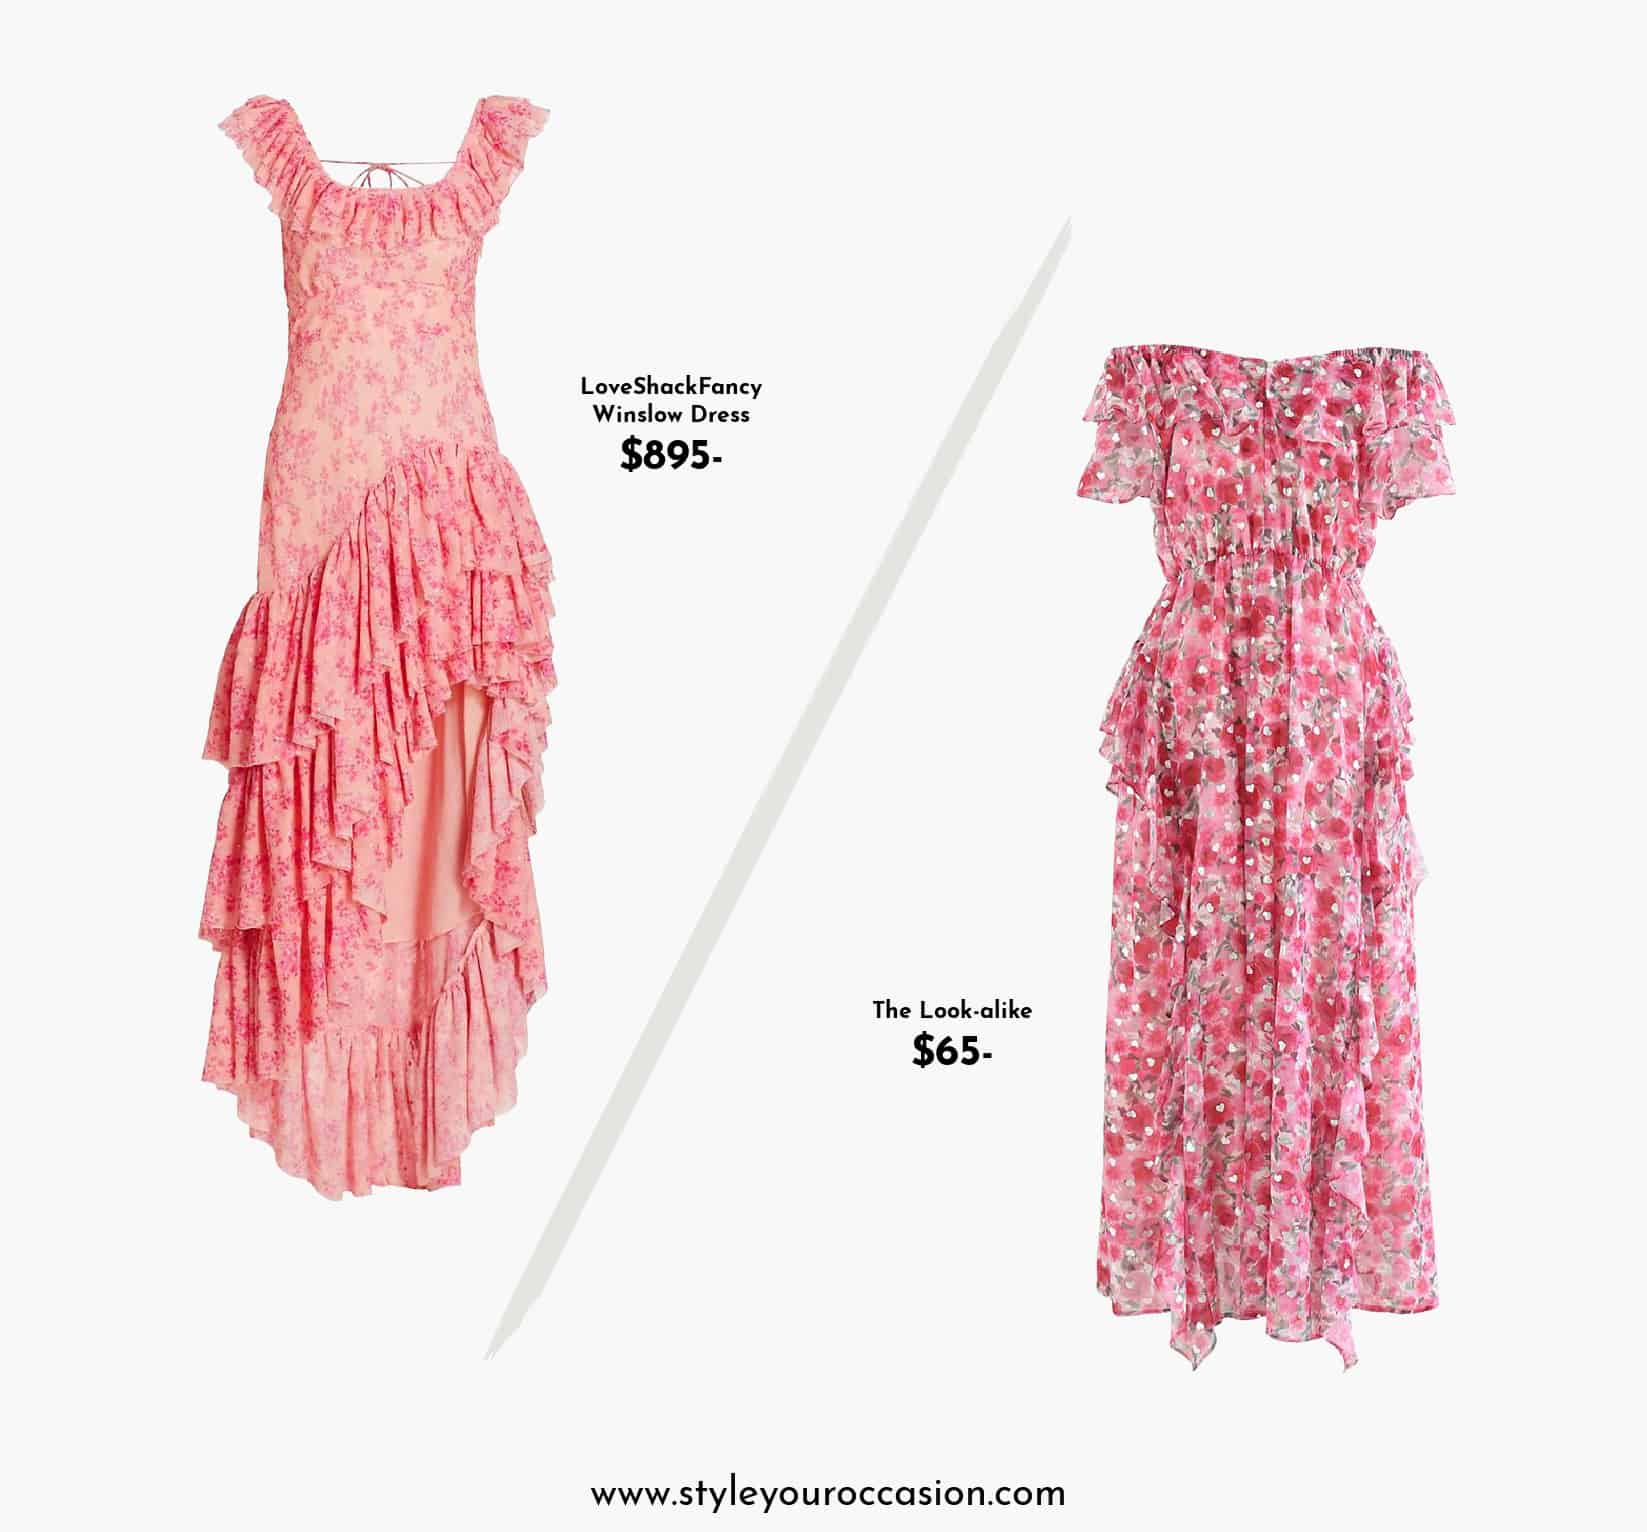 image of two pink ruffle maxi dresses that look alike